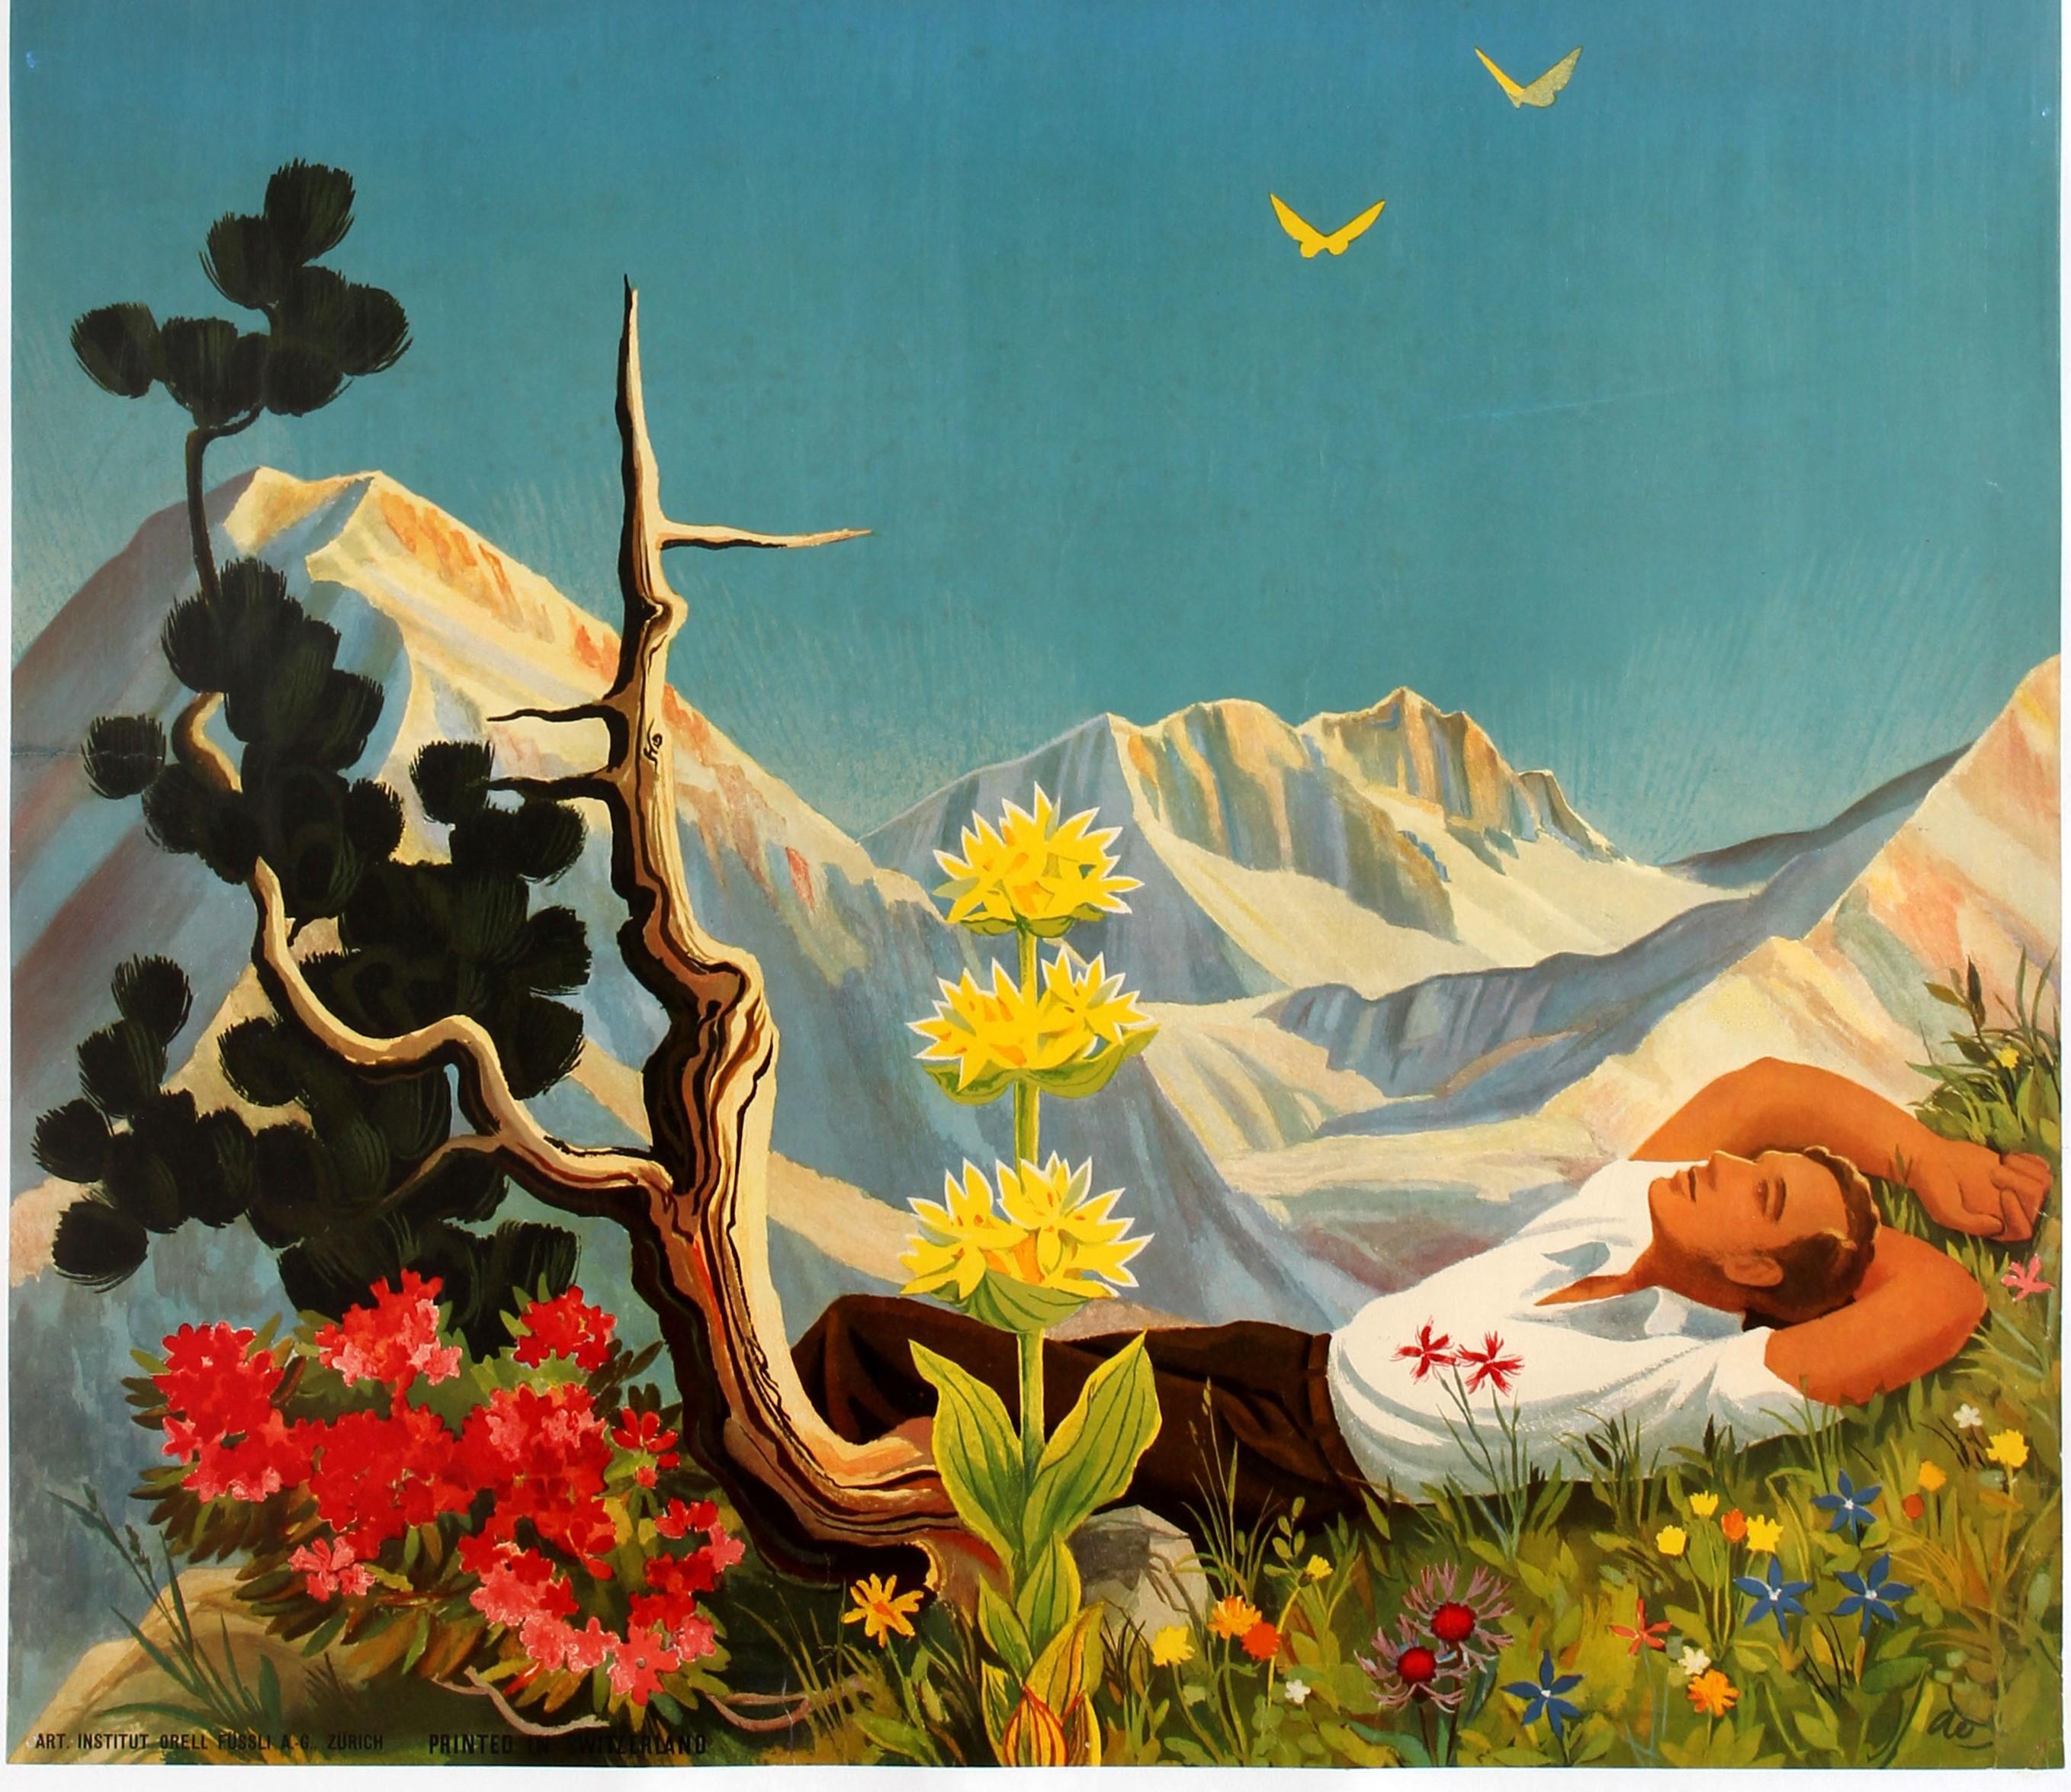 Original vintage travel poster for Arosa in the Swiss Alps featuring colorful artwork by Hans Aeschbach (1911-1999) depicting a hiker lying on the grass under a bright blue sky with a tree and flowers in the foreground, two yellow birds in the sky